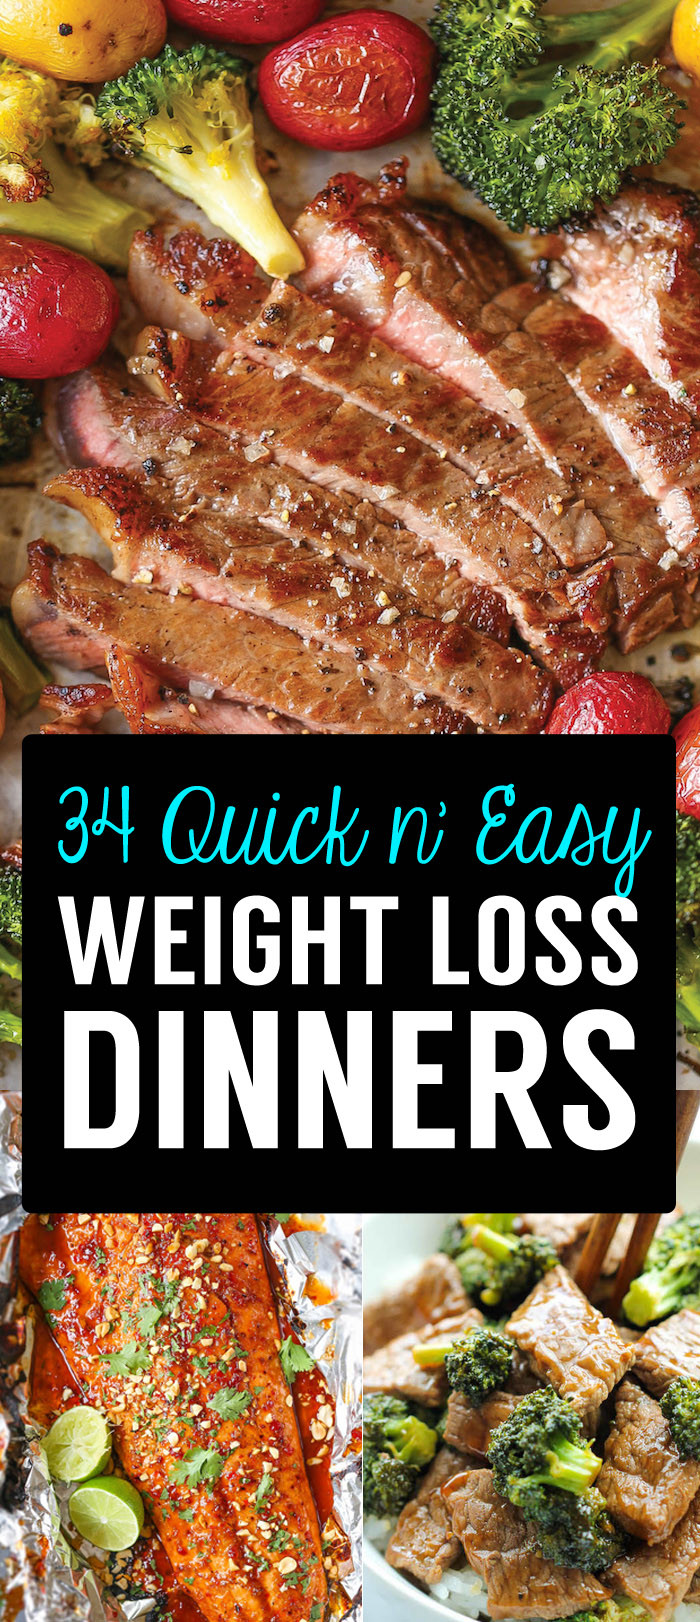 Easy Weight Loss Recipes
 34 Super Easy Weight Loss Dinners You’ll Be Able To Cook